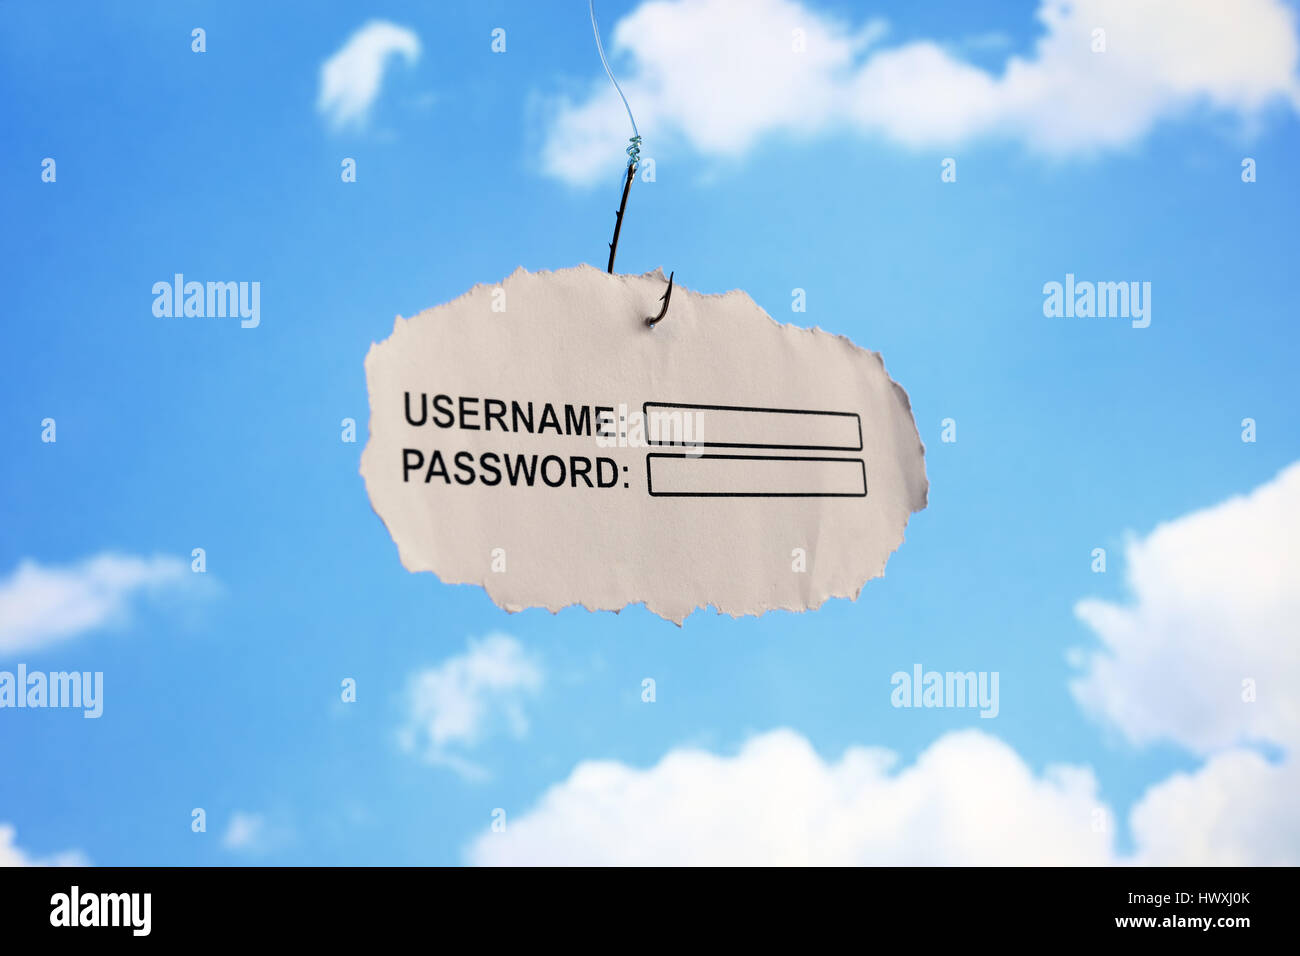 Computer username login and password on paper attached to a hook concept for phishing or internet security Stock Photo